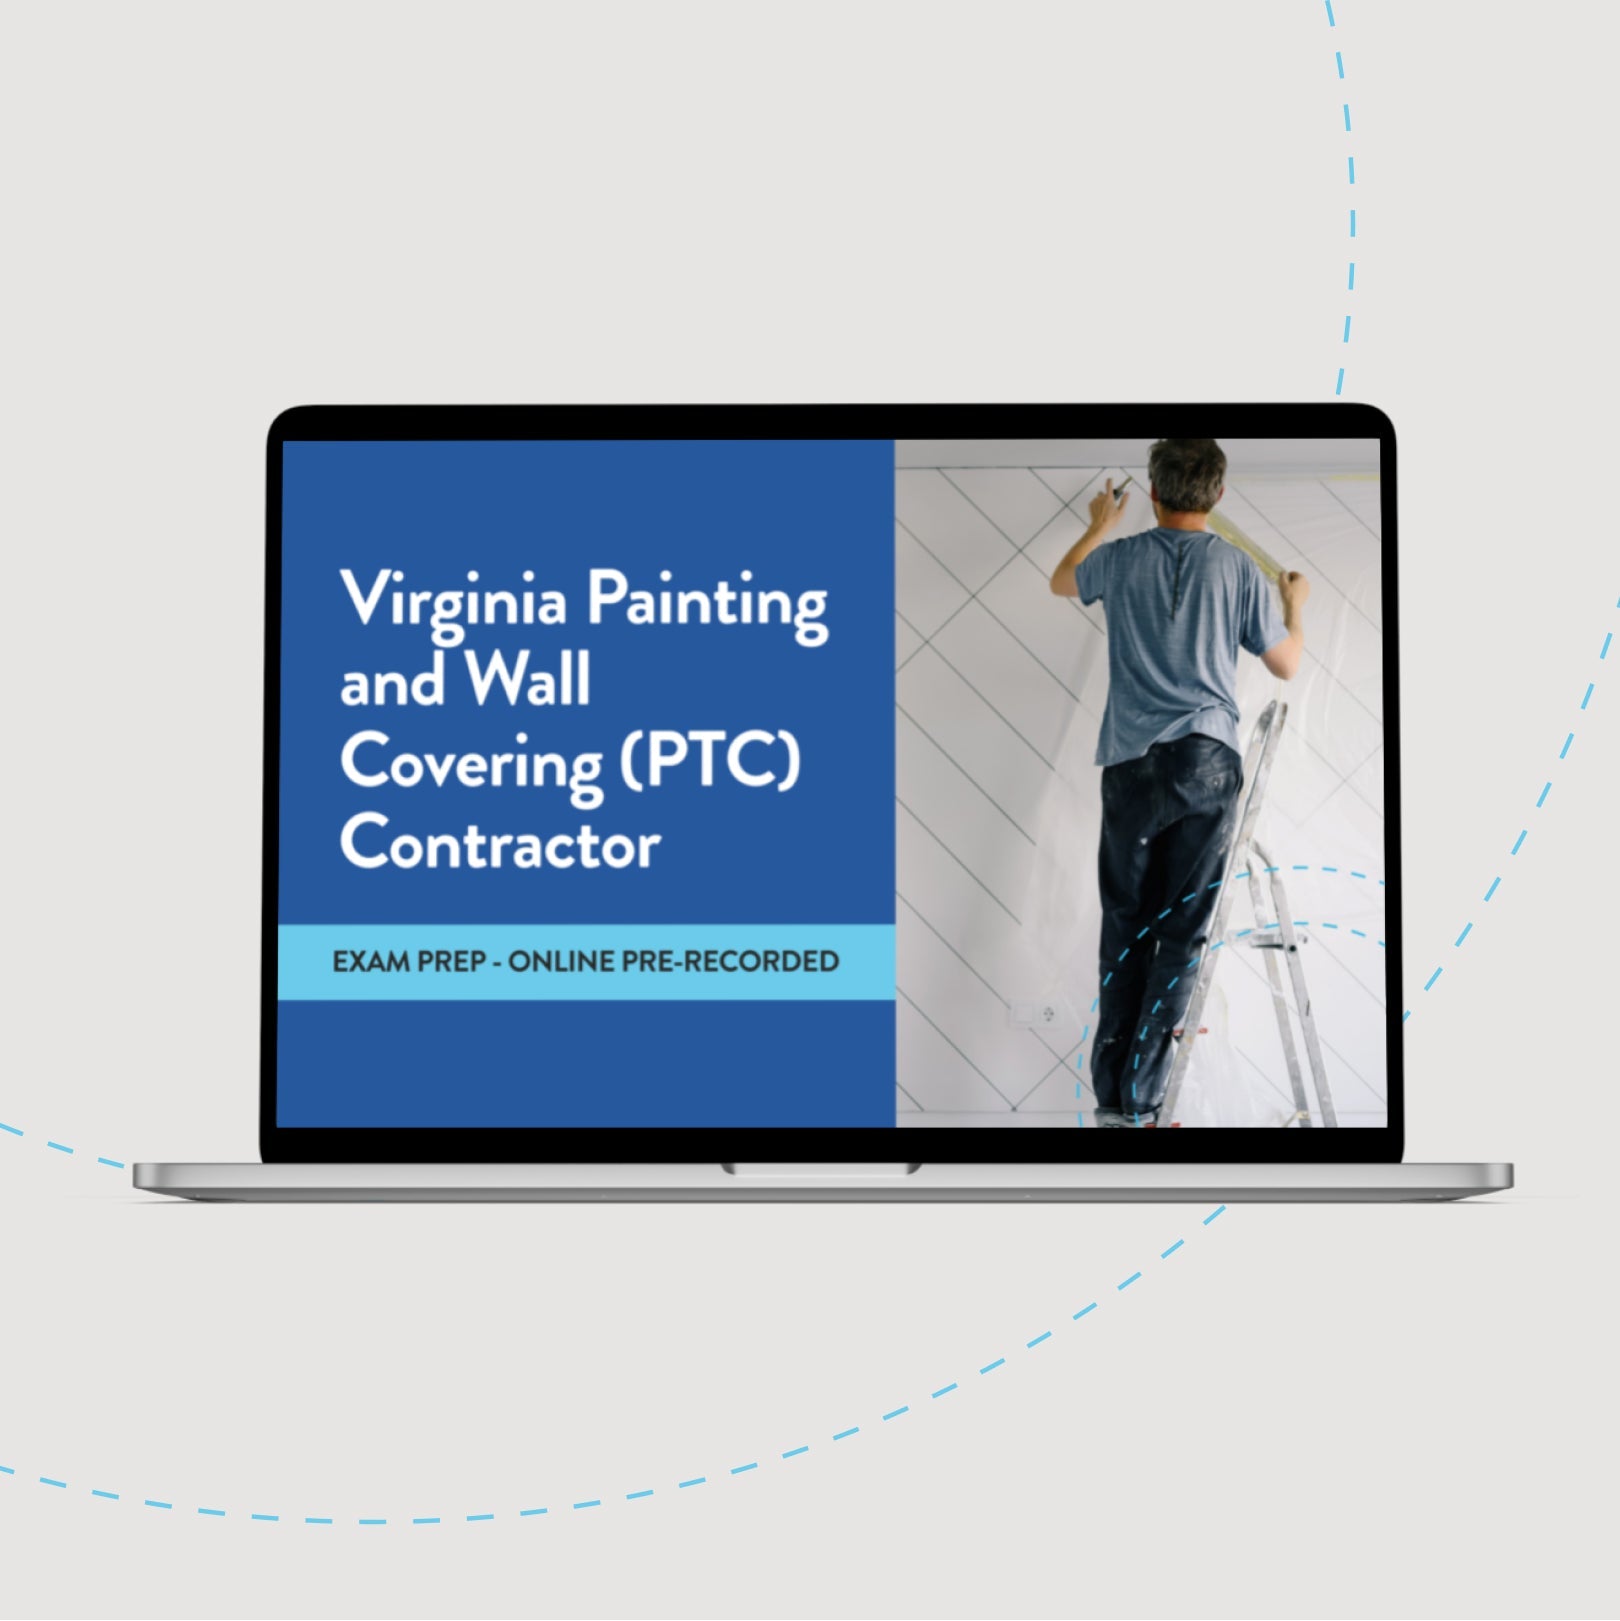 Virginia Painting and Wall Covering (PTC) Contractor Exam Prep - Online Pre-Recorded